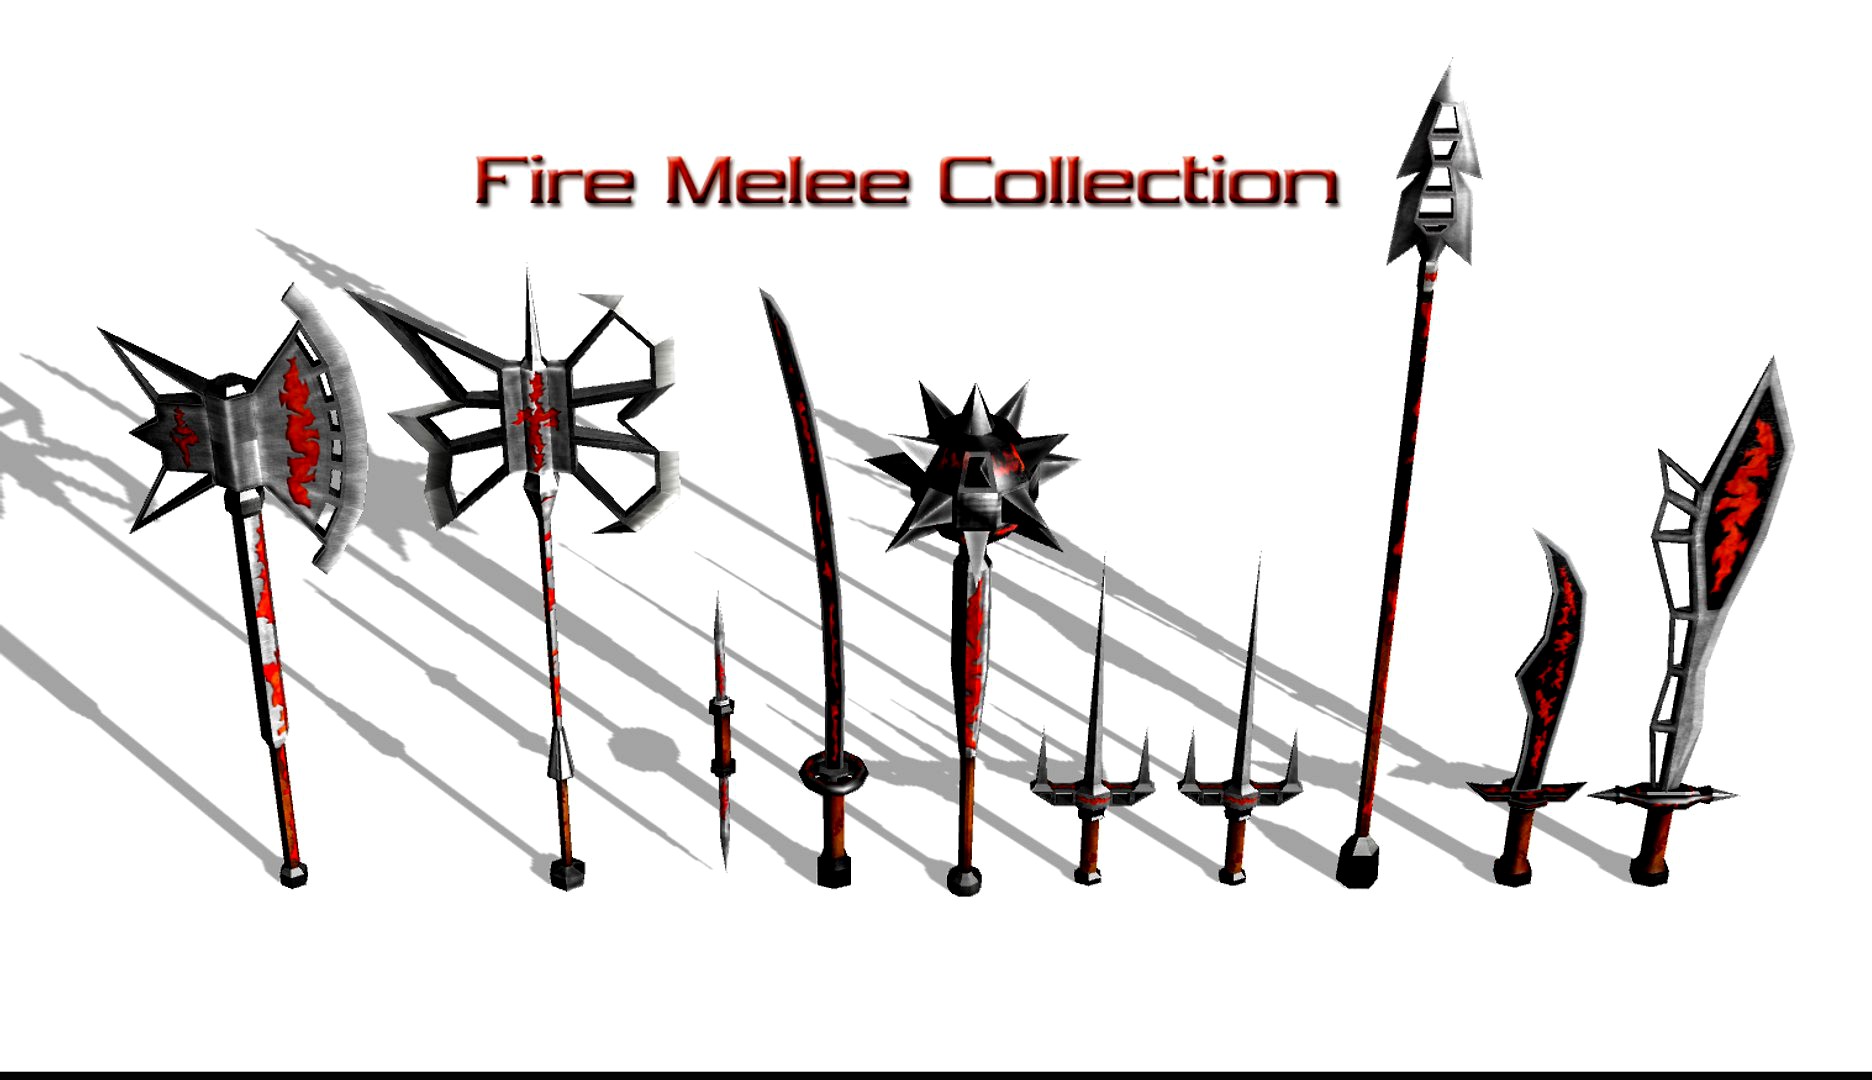 Fire Melee Collection